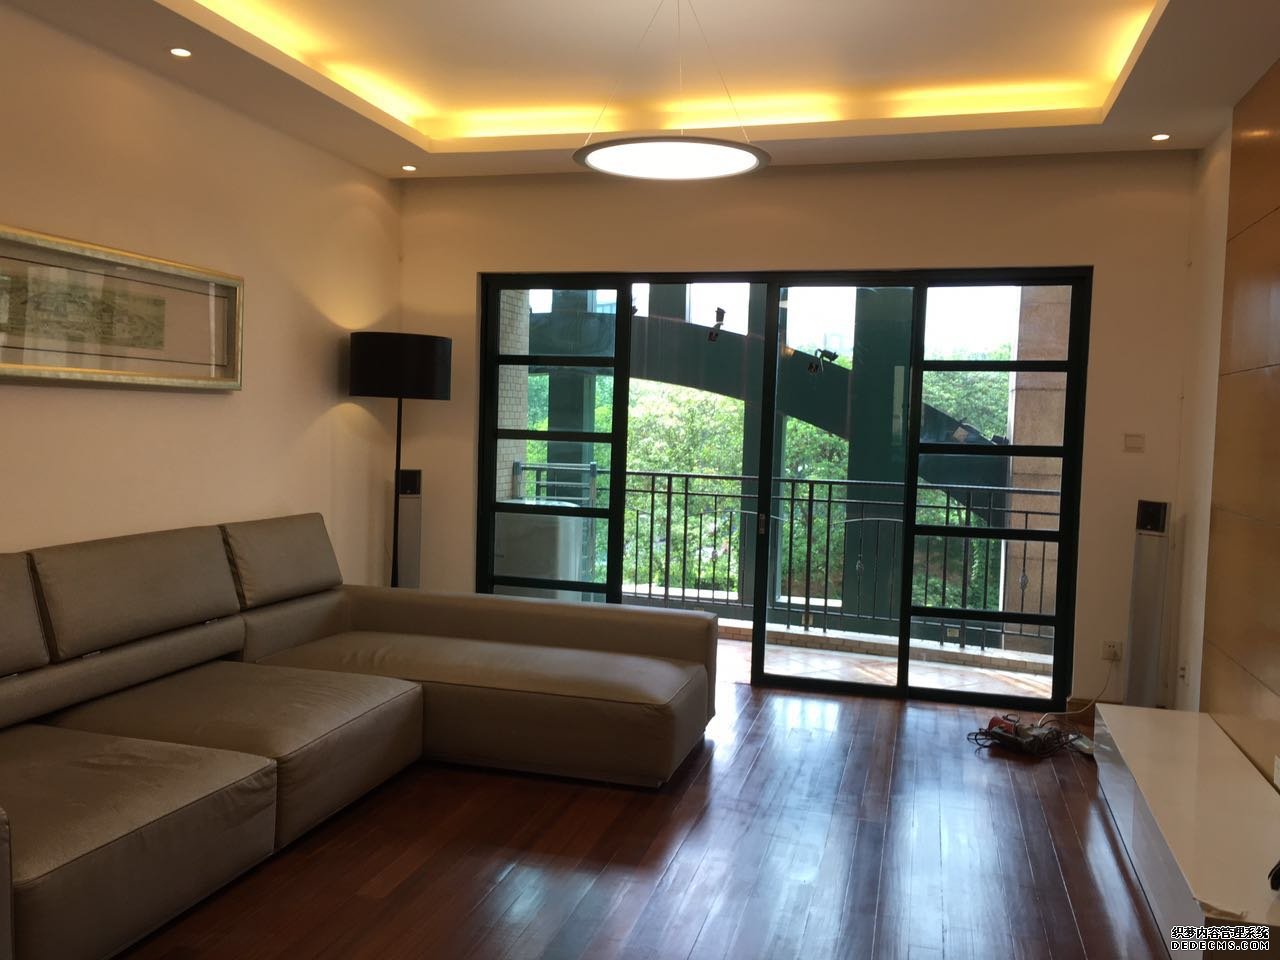 changning family apartment Modern 3BR Apartment for rent in Yanlord Riviera Garden, Changning